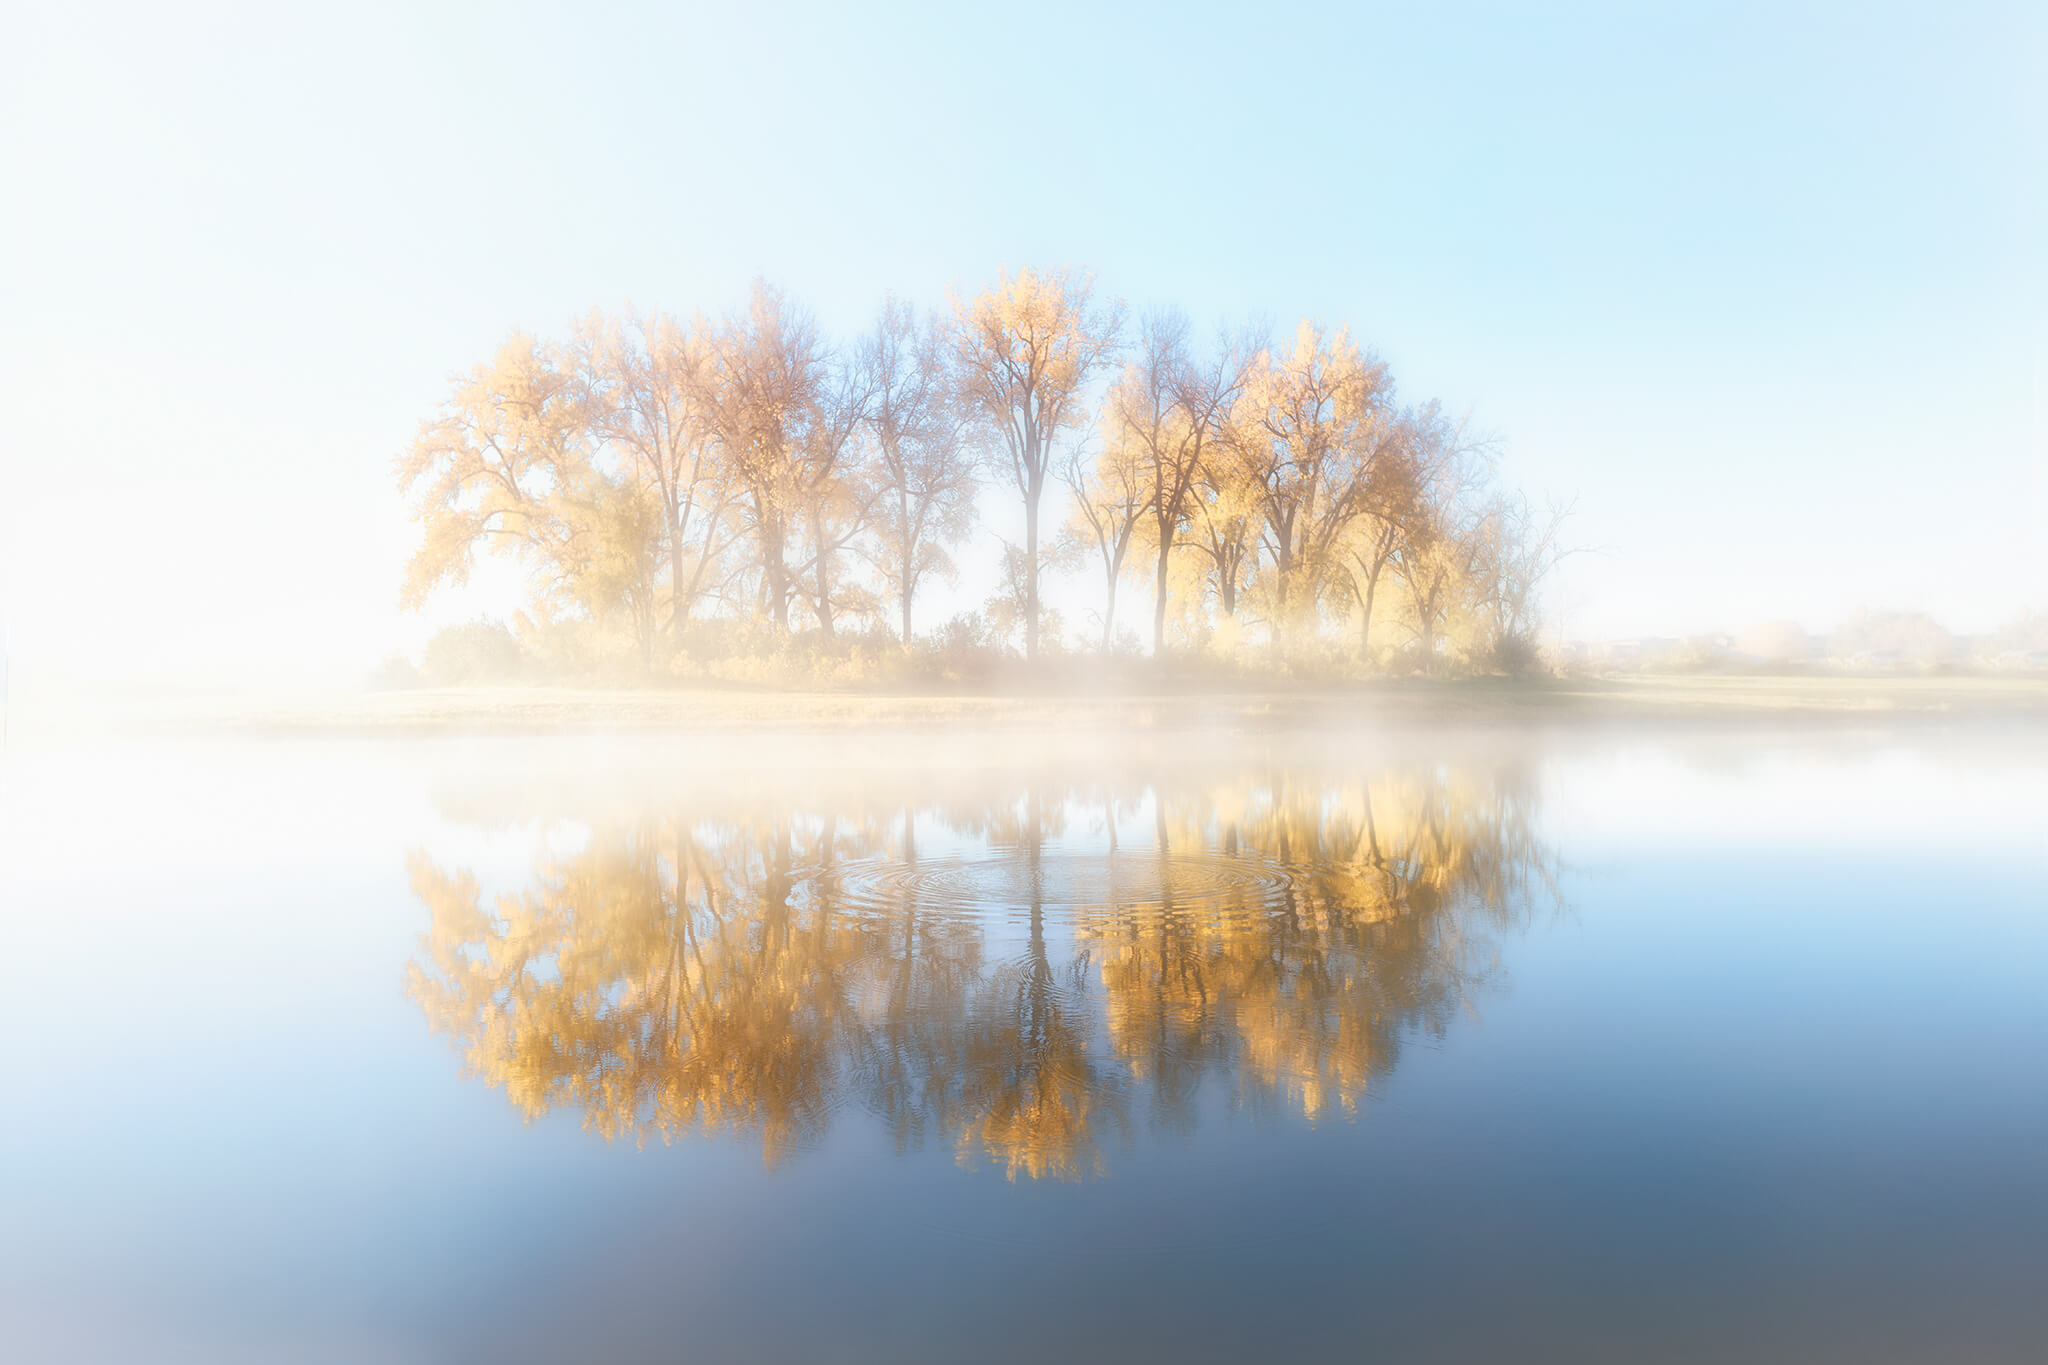 Tree Reflection in Morning